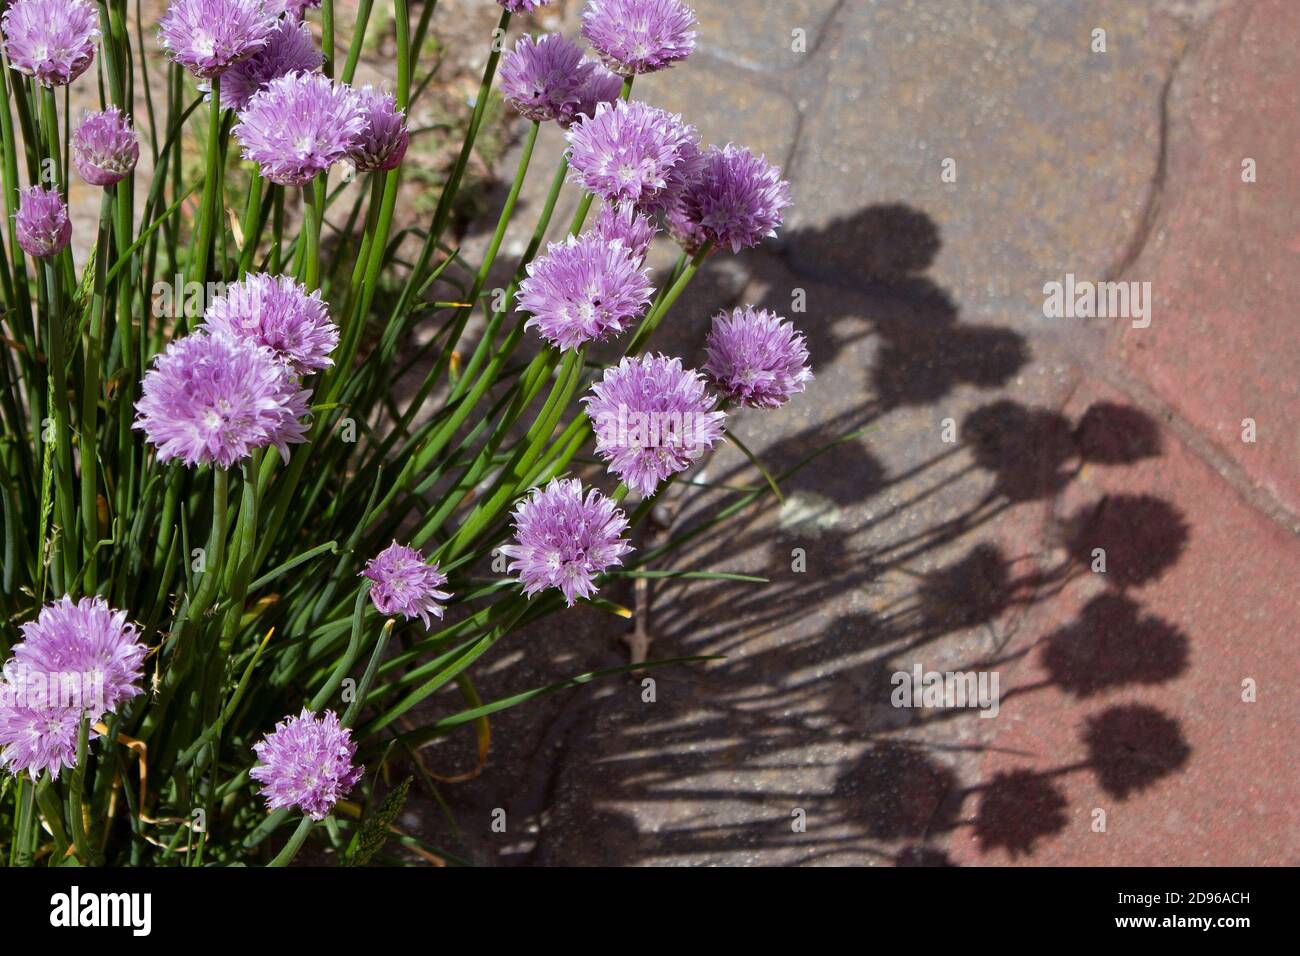 Purple chive flowers with shadows against block paving Stock Photo